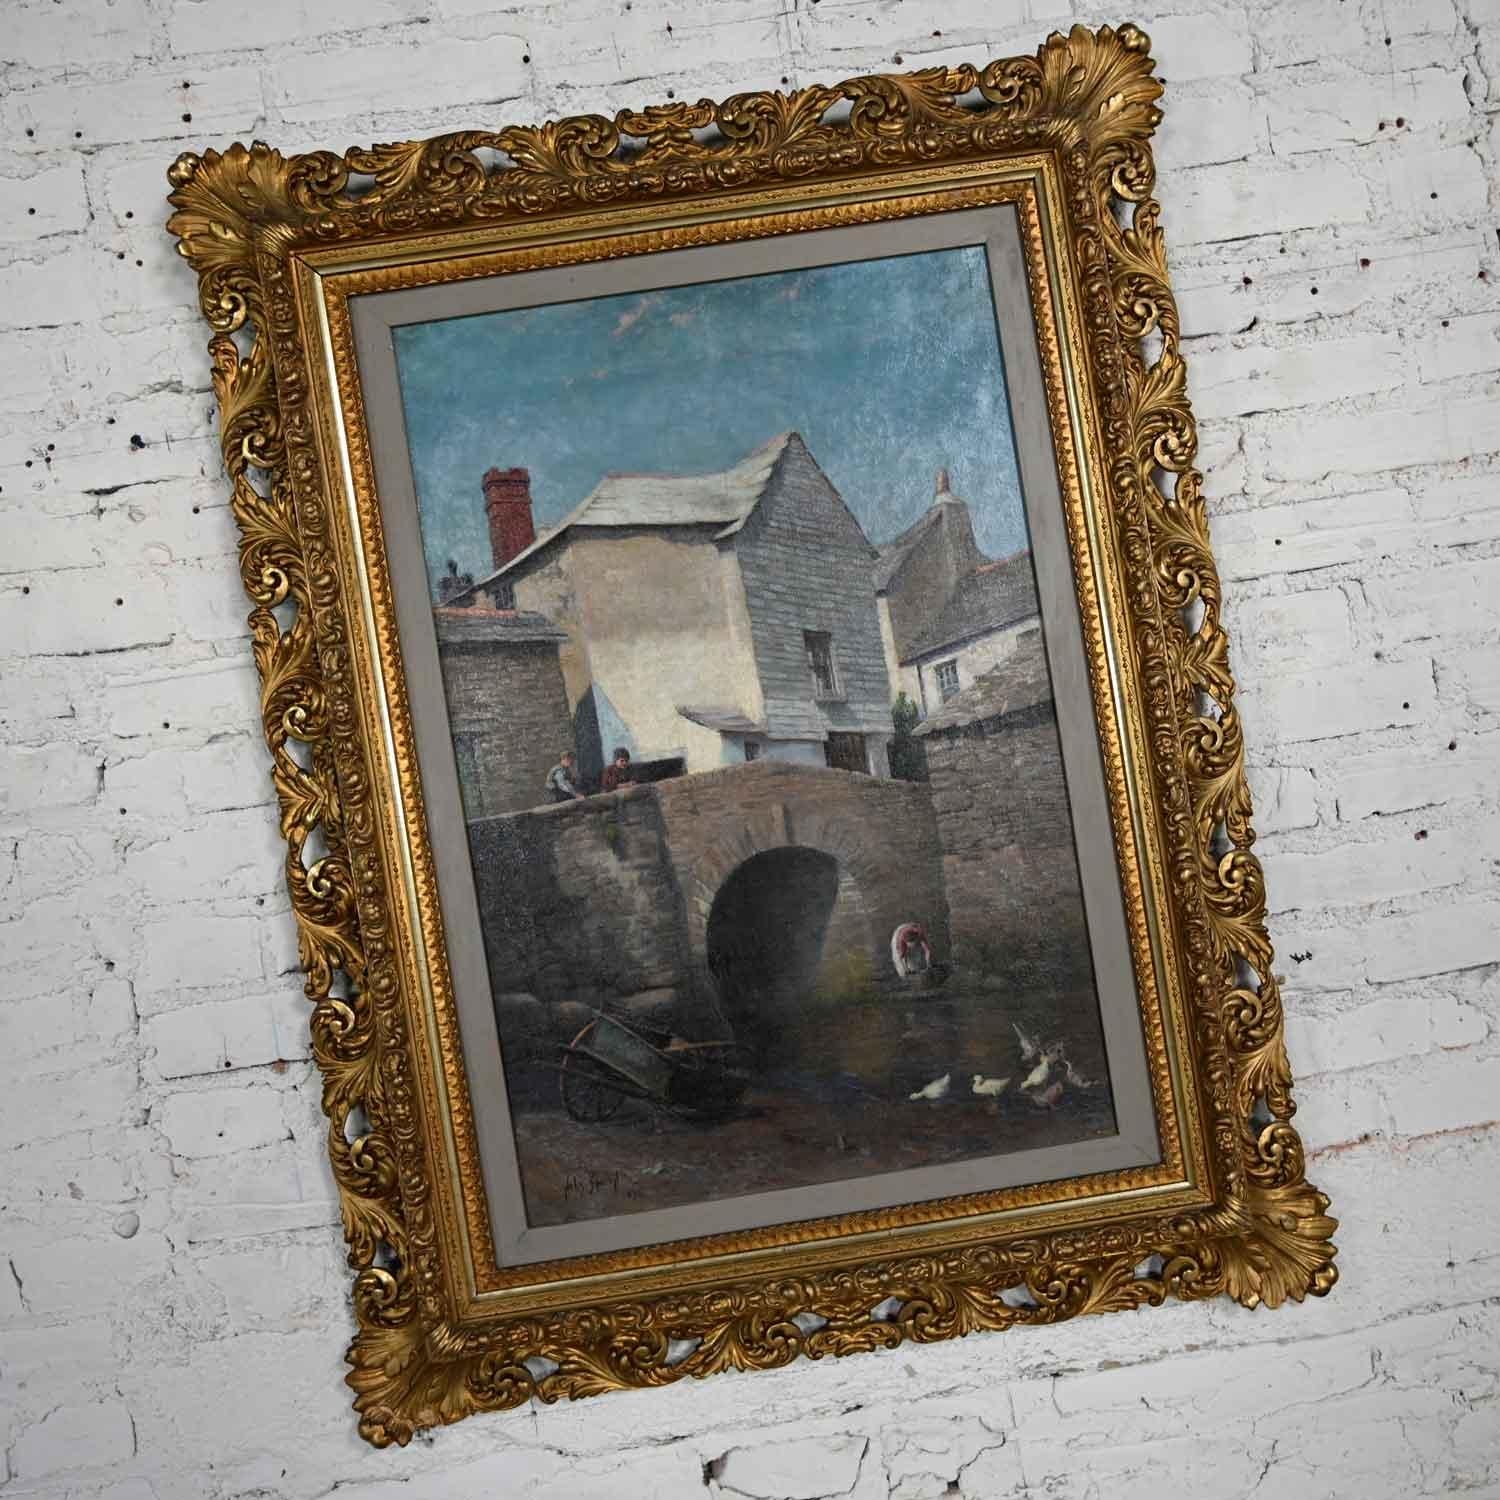 Fabulous antique realism landscape oil on canvas painting titled Polperro signed Hely Smith (a.k.a. Hely Augustus Morton Smith) with original Baroque style gilded frame dated 1896. Beautiful condition, keeping in mind that this is vintage and not